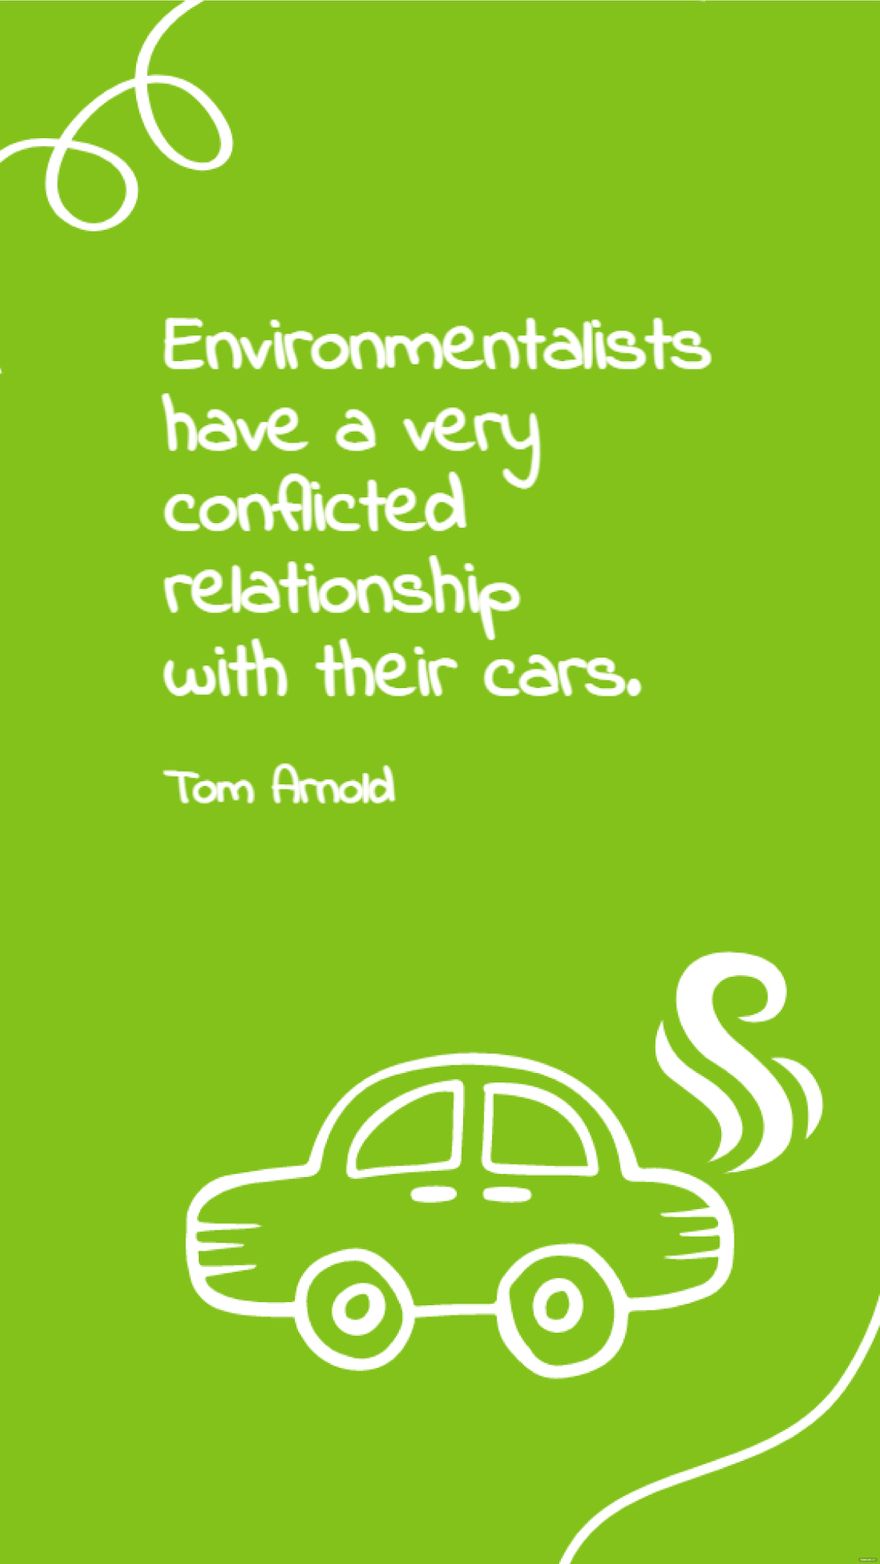 Tom Arnold - Environmentalists have a very conflicted relationship with their cars.